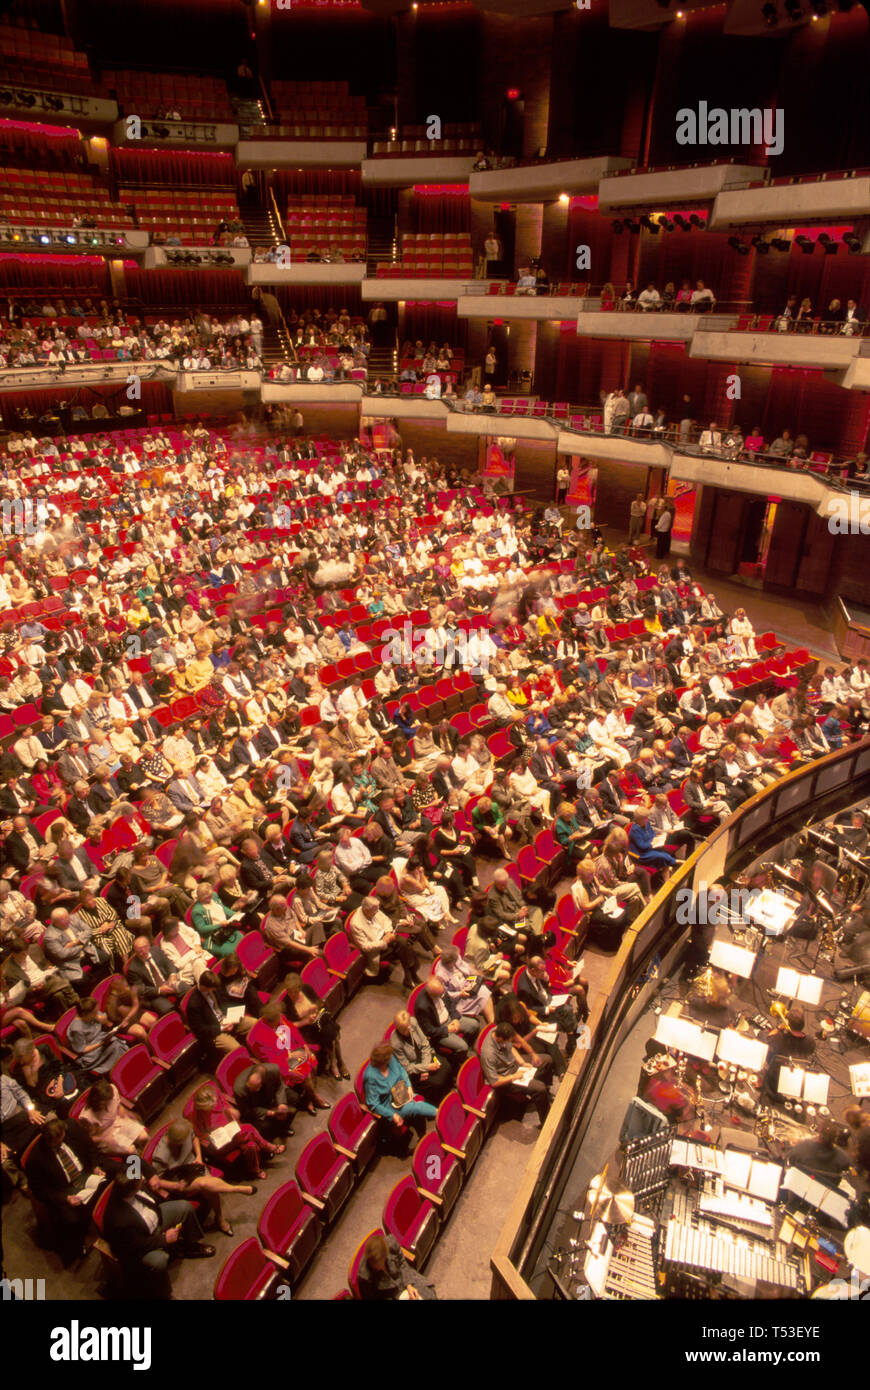 Tampa Florida,Gulf Coast city,Performing Arts Center,centre,audience,crowd,orchestra pit before performance,entertainment,FL264 Stock Photo